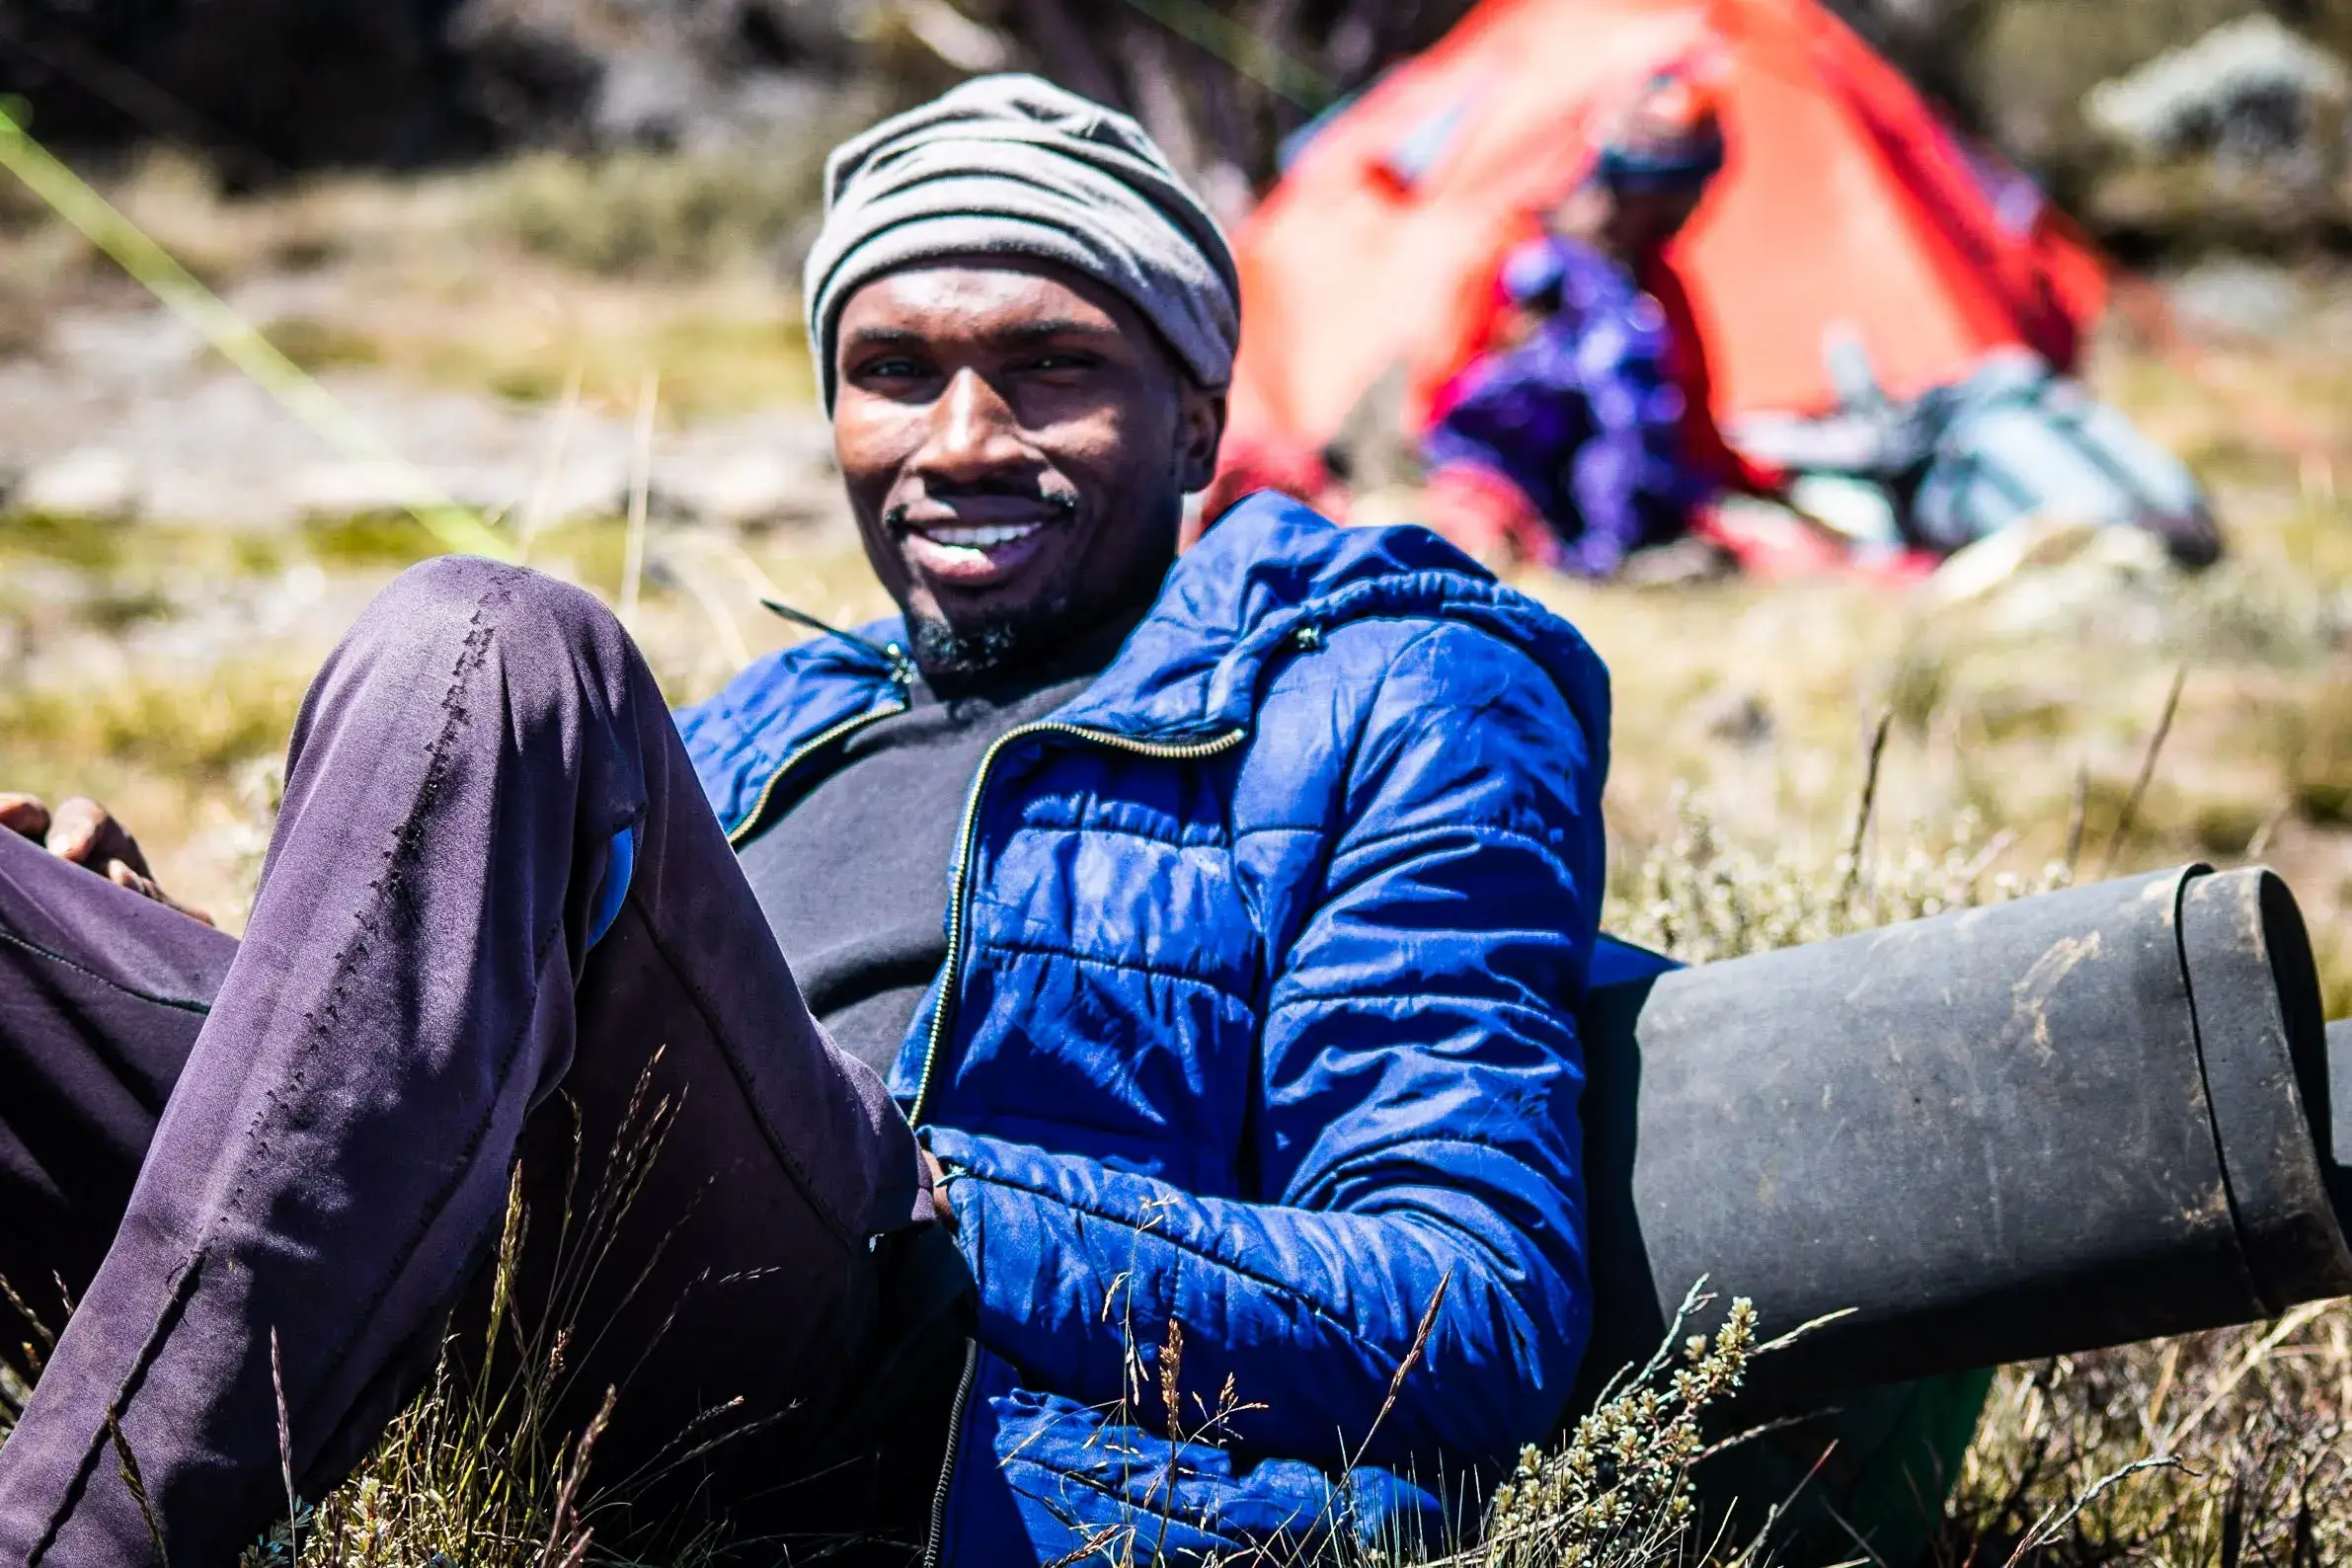 Afrikan adventures porter who is helping the trekkers to complete their summit